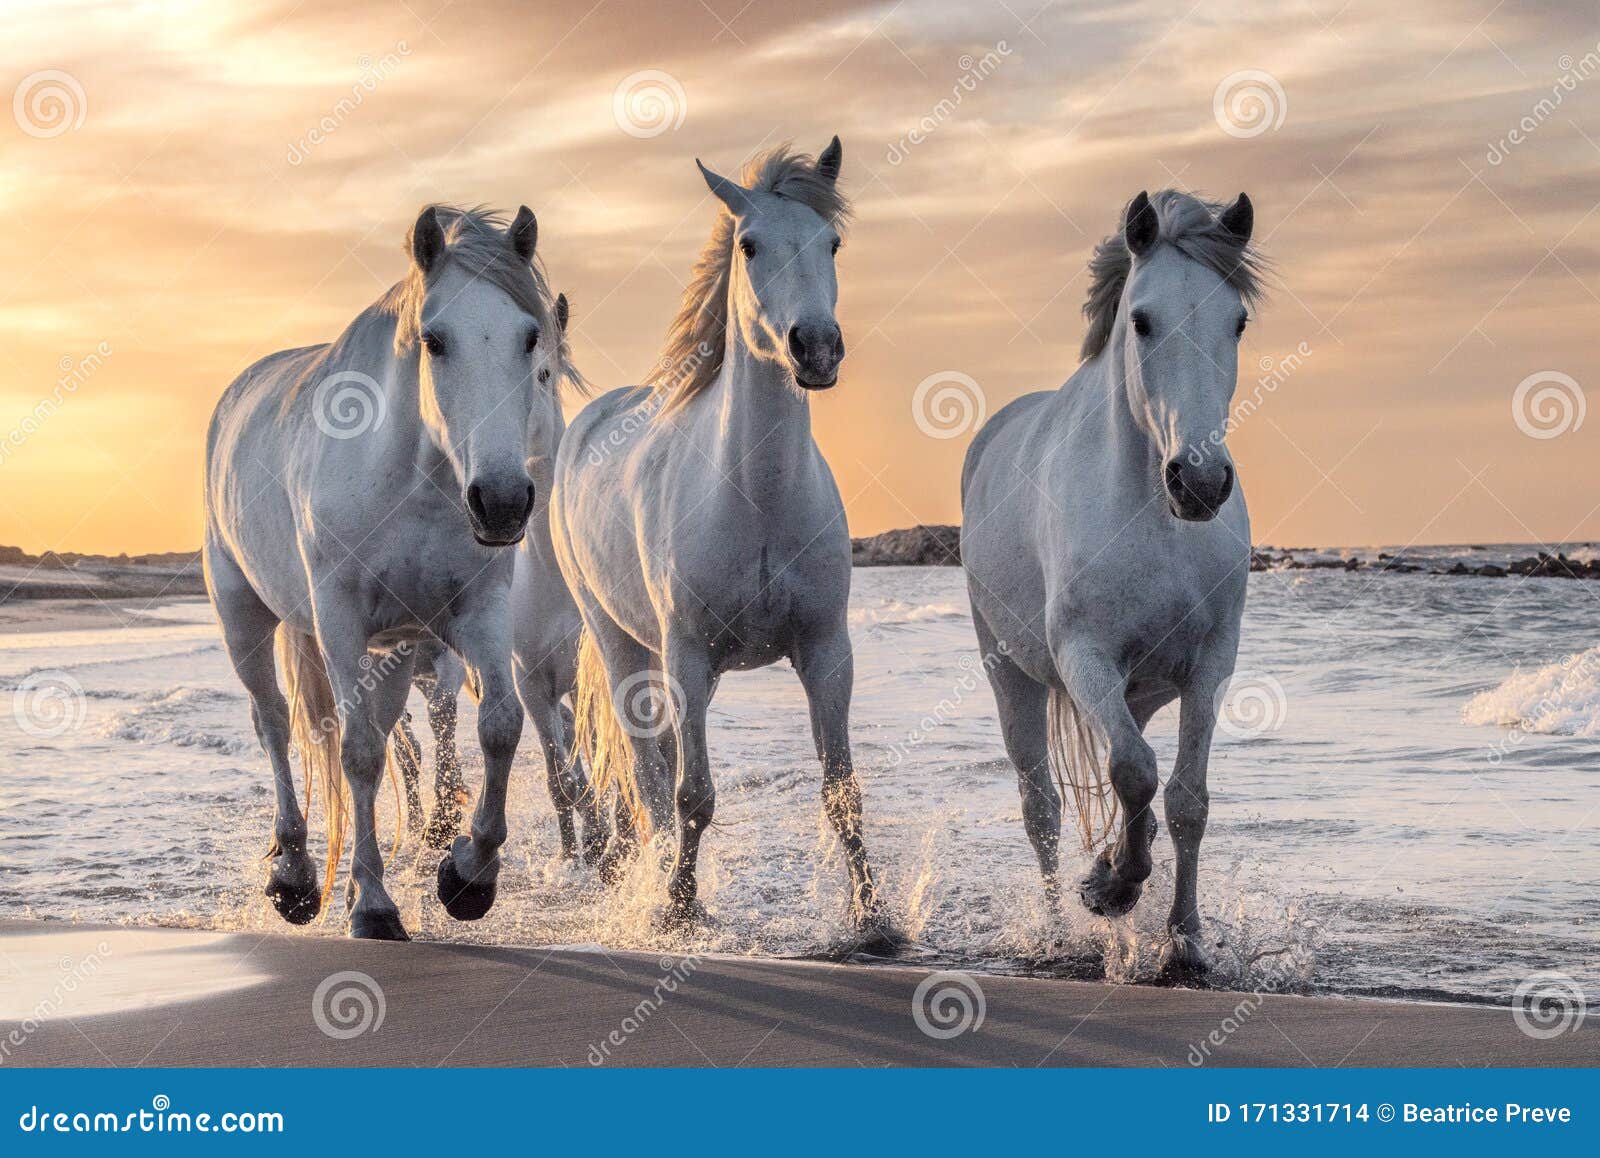 white horses in camargue, france